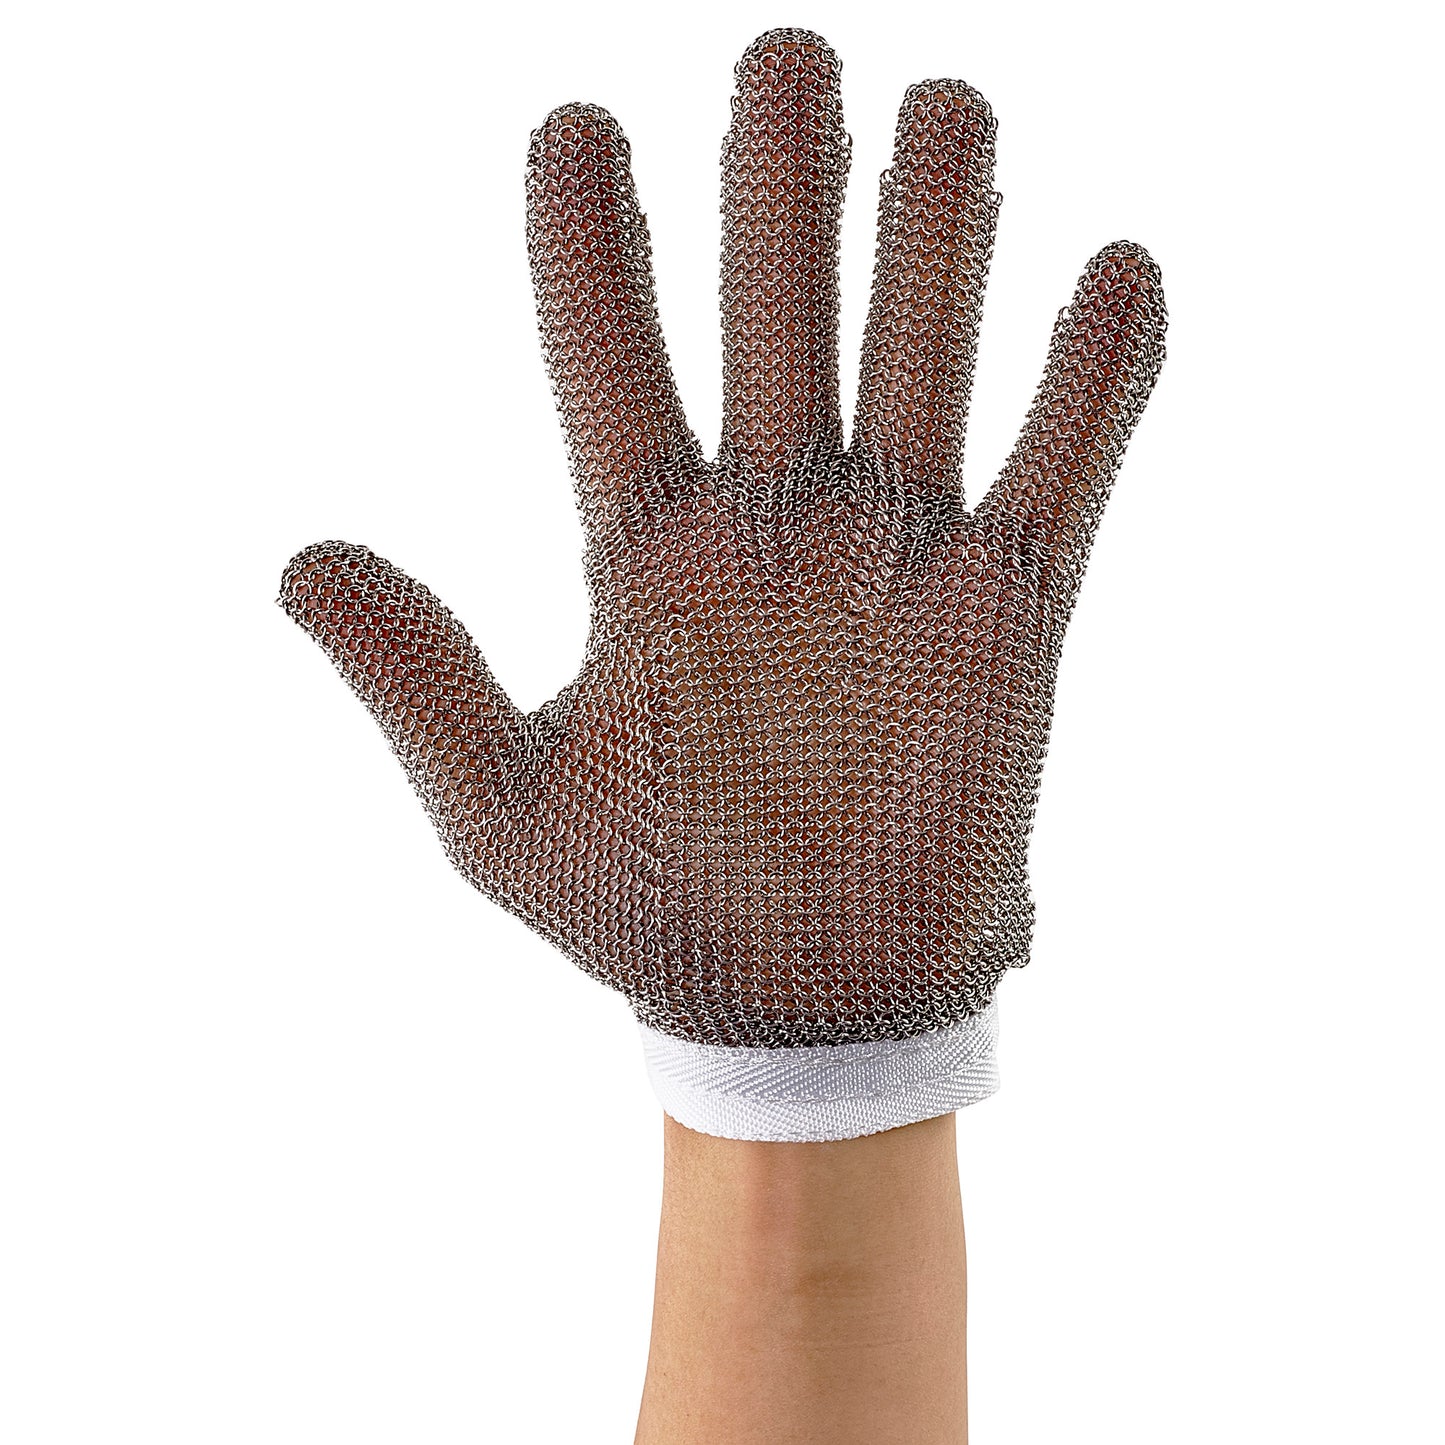 PMG-1S - Stainless Steel Protective Mesh Glove - Small